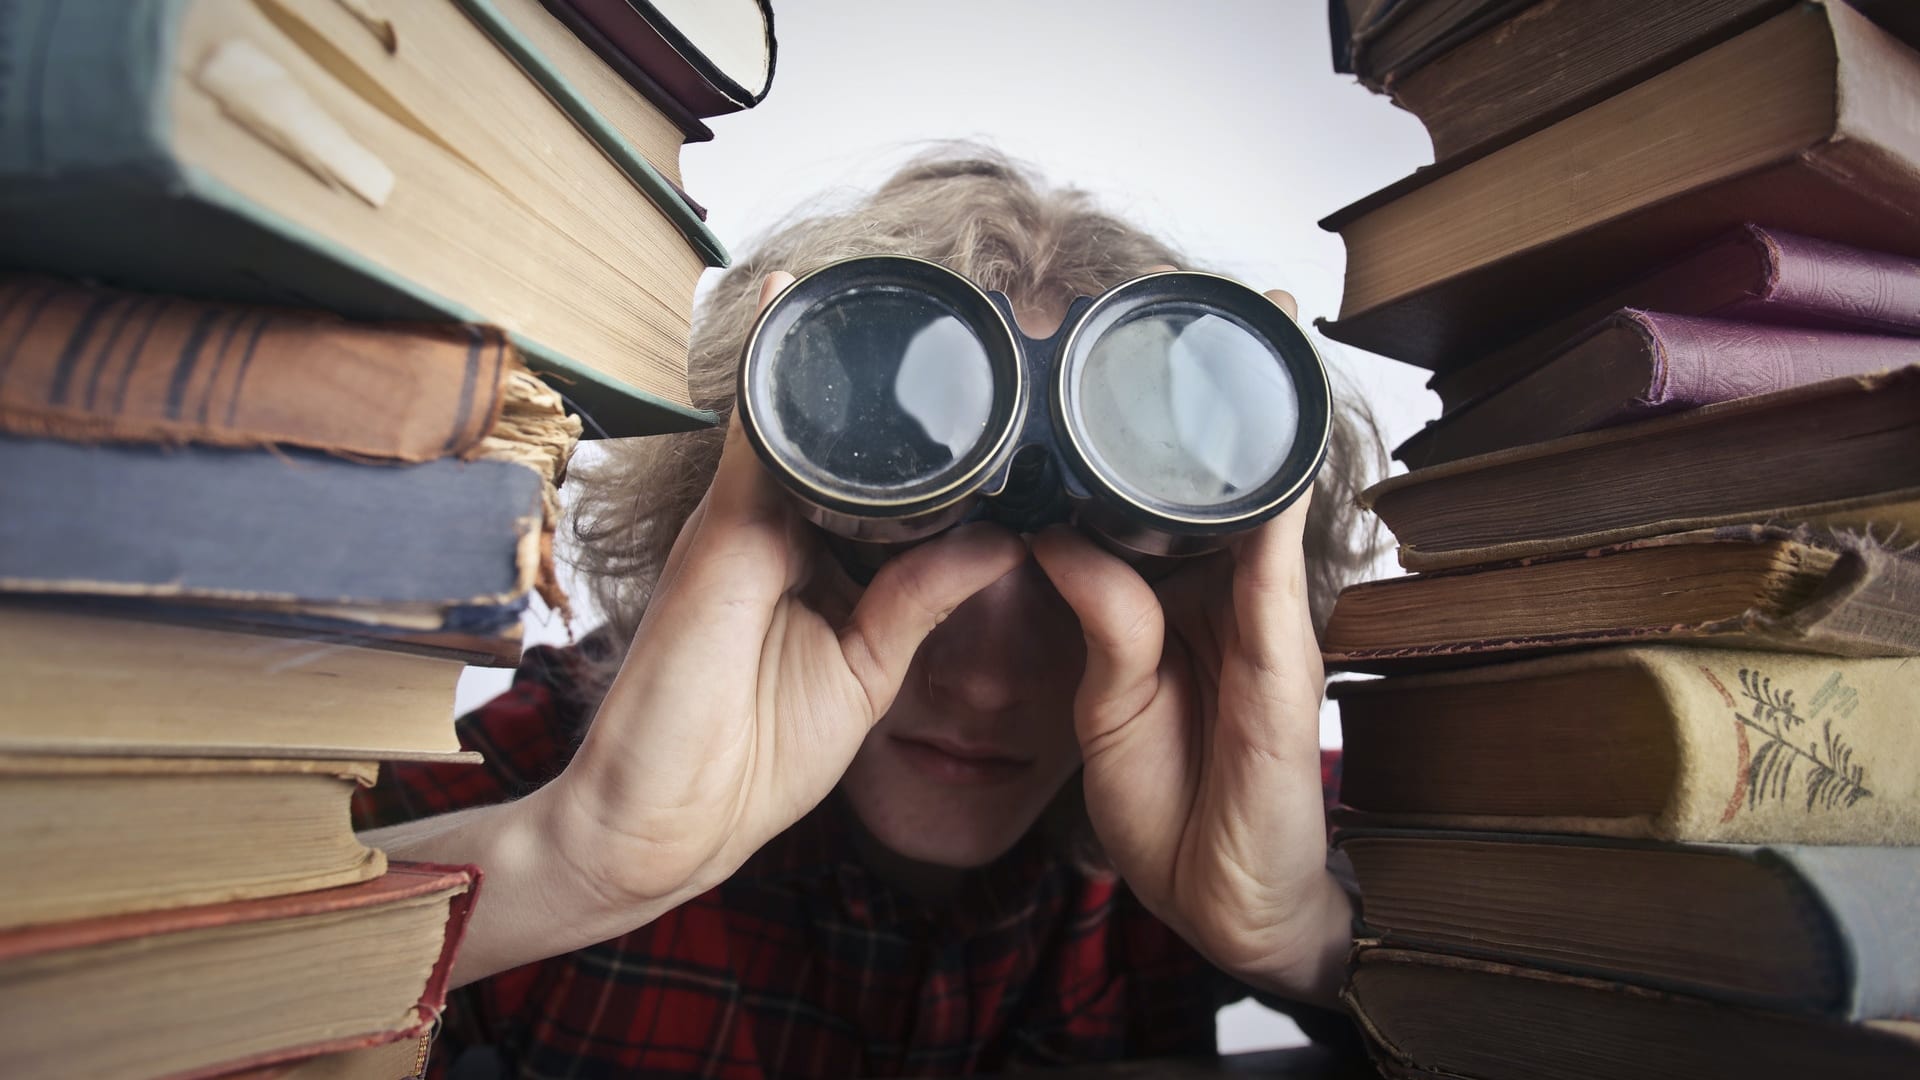 He or she in between columns of books is zooming with binoculars